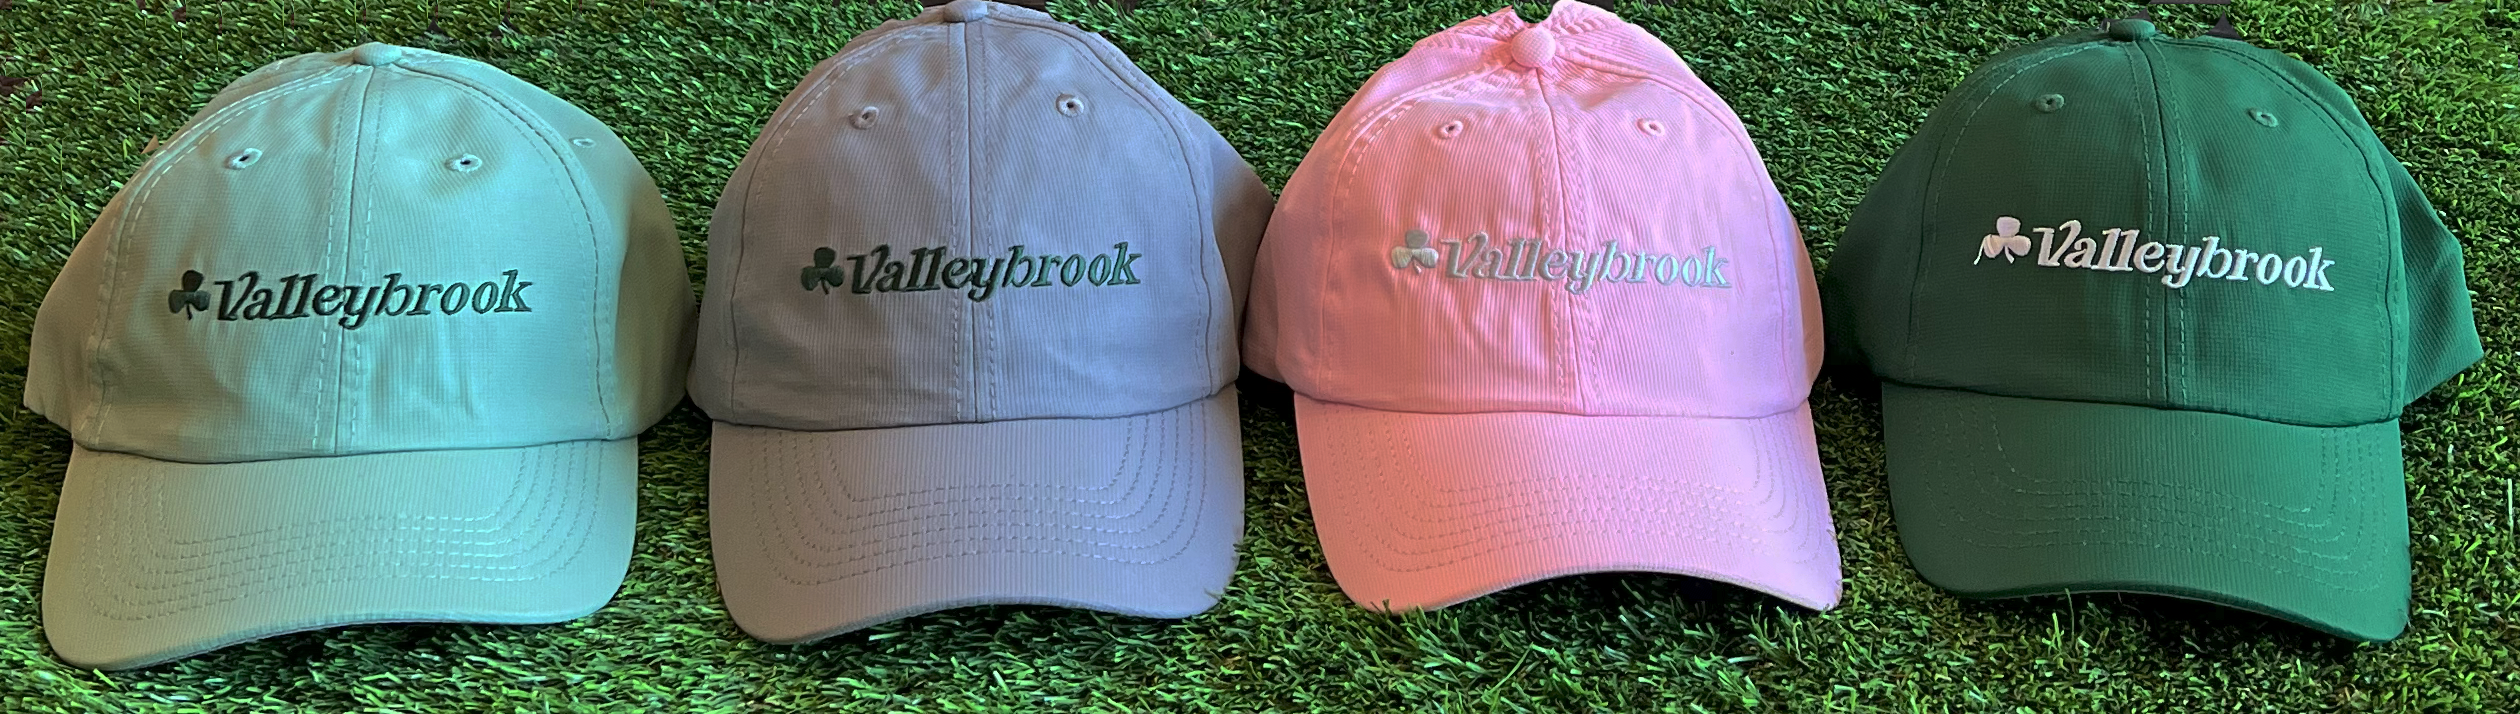 Valleybrook Club hats, including green, gray, and pink